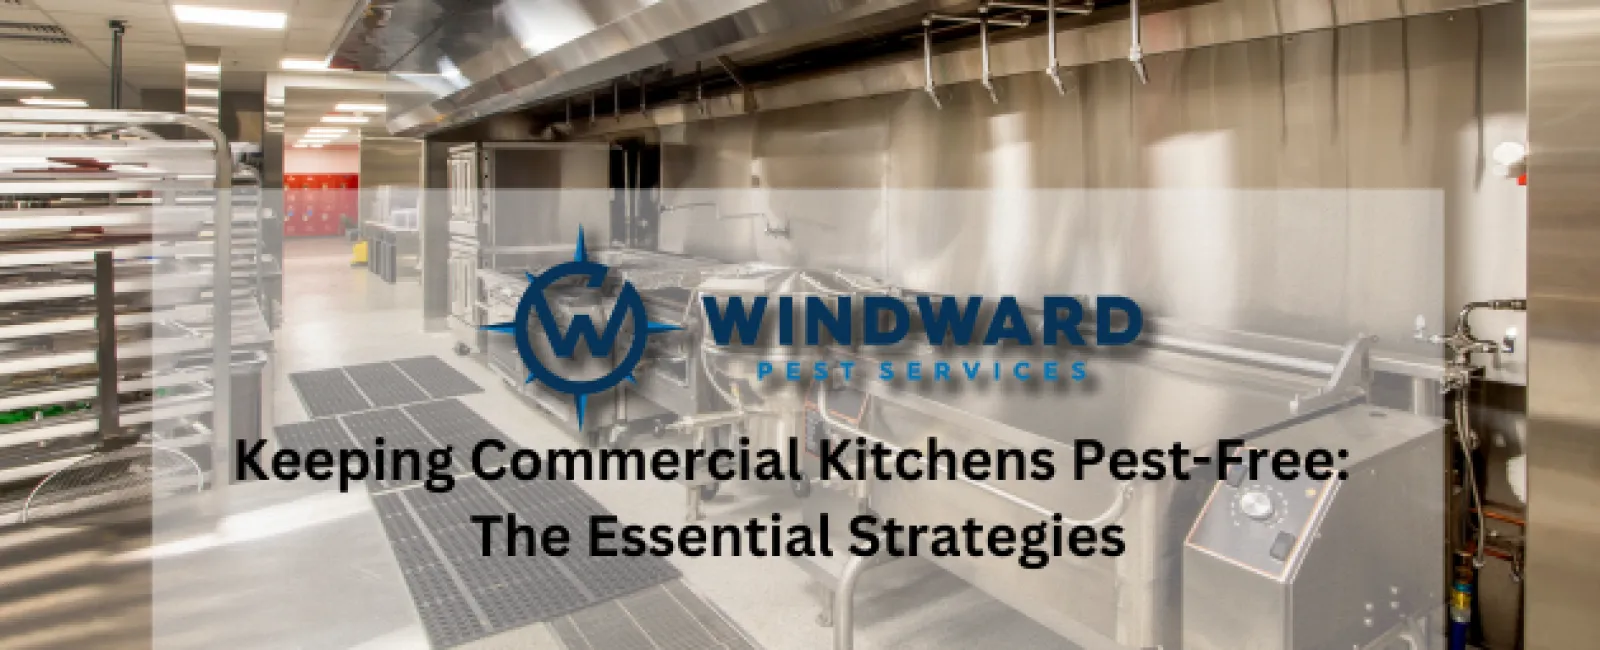 Keeping Commercial Kitchens Pest-Free: The Essential Strategies